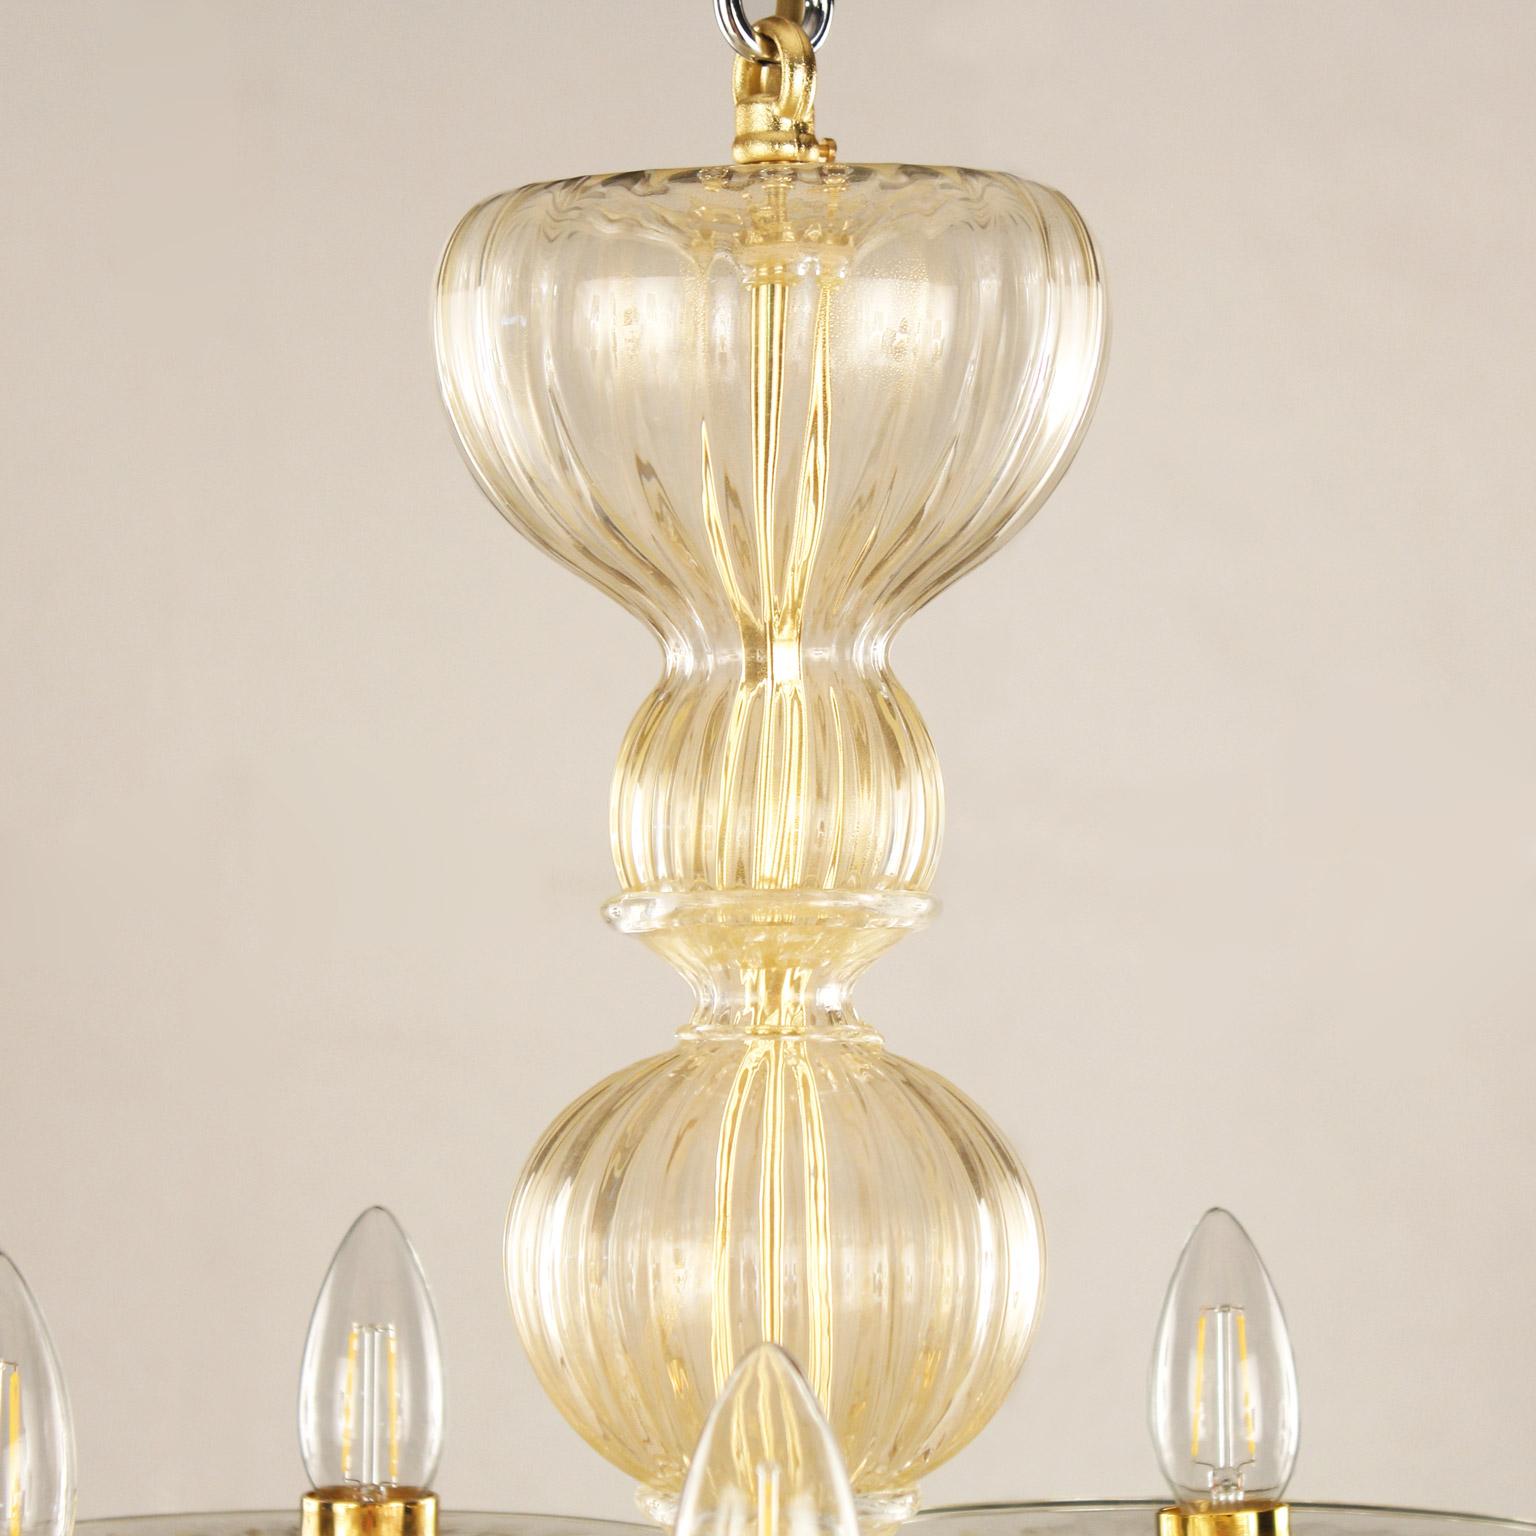 Chandelier 10+ 5 Arms Golden Artistic Glass Simplicissimus 360 by Multiforme In New Condition For Sale In Trebaseleghe, IT